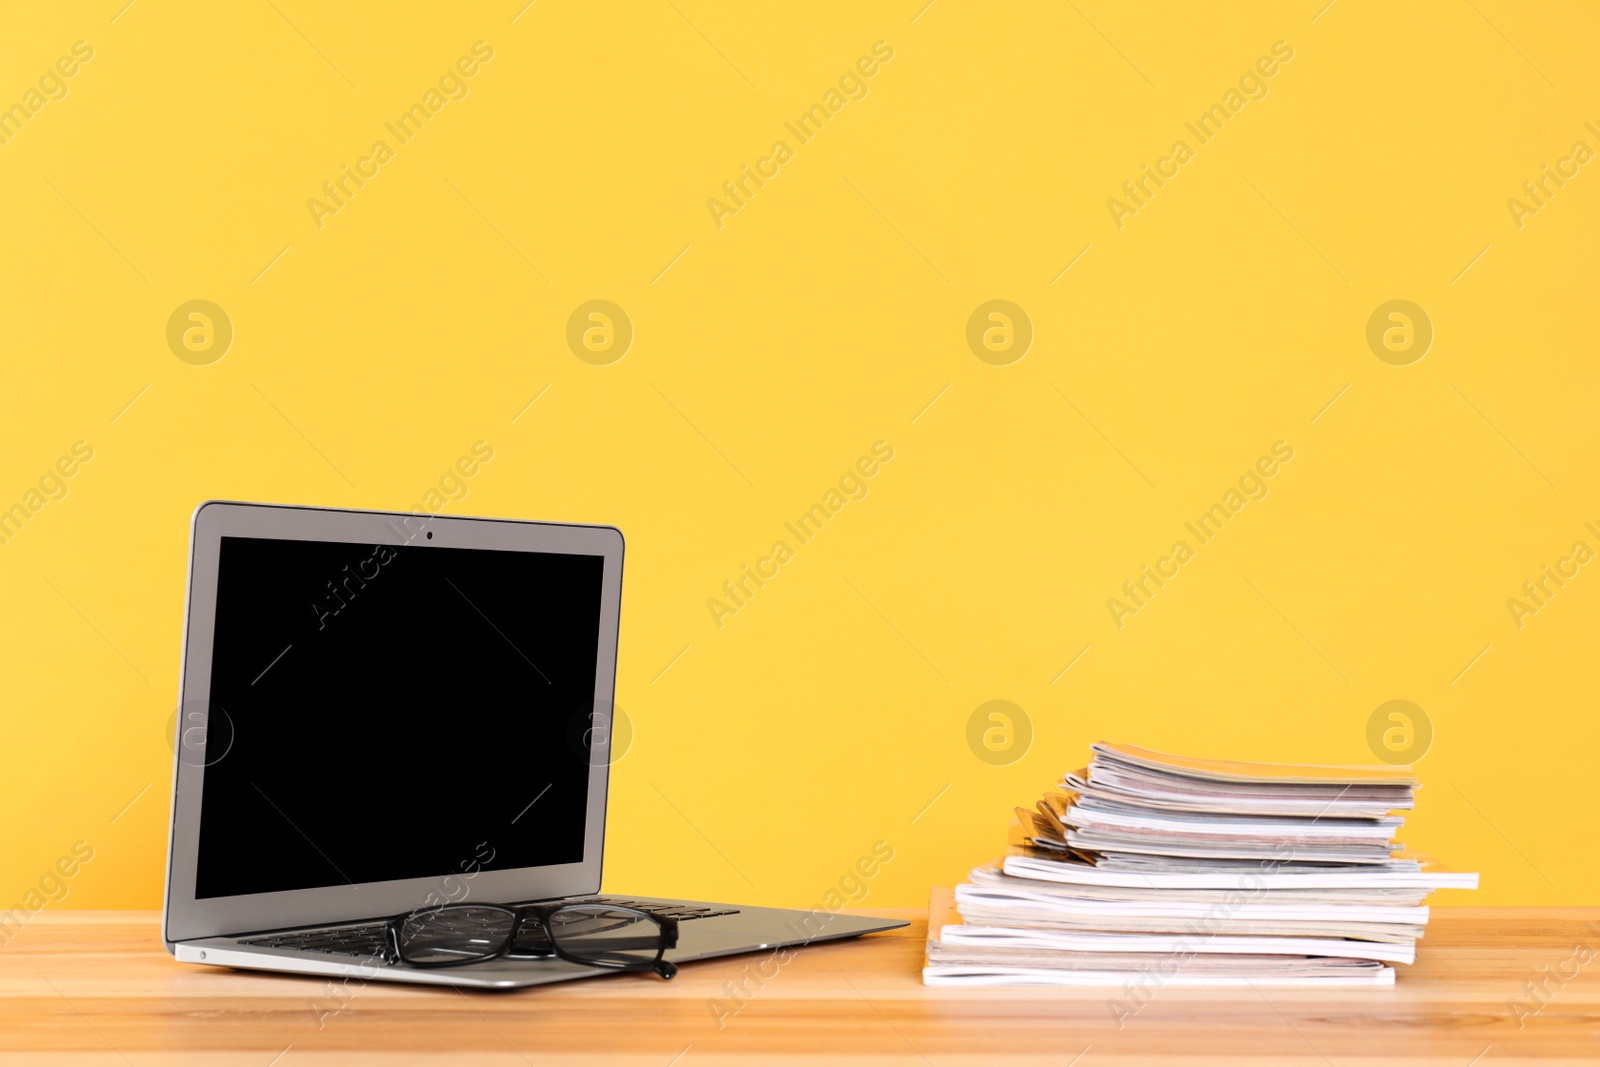 Photo of Laptop, glasses and stack of magazines on wooden table. Space for text